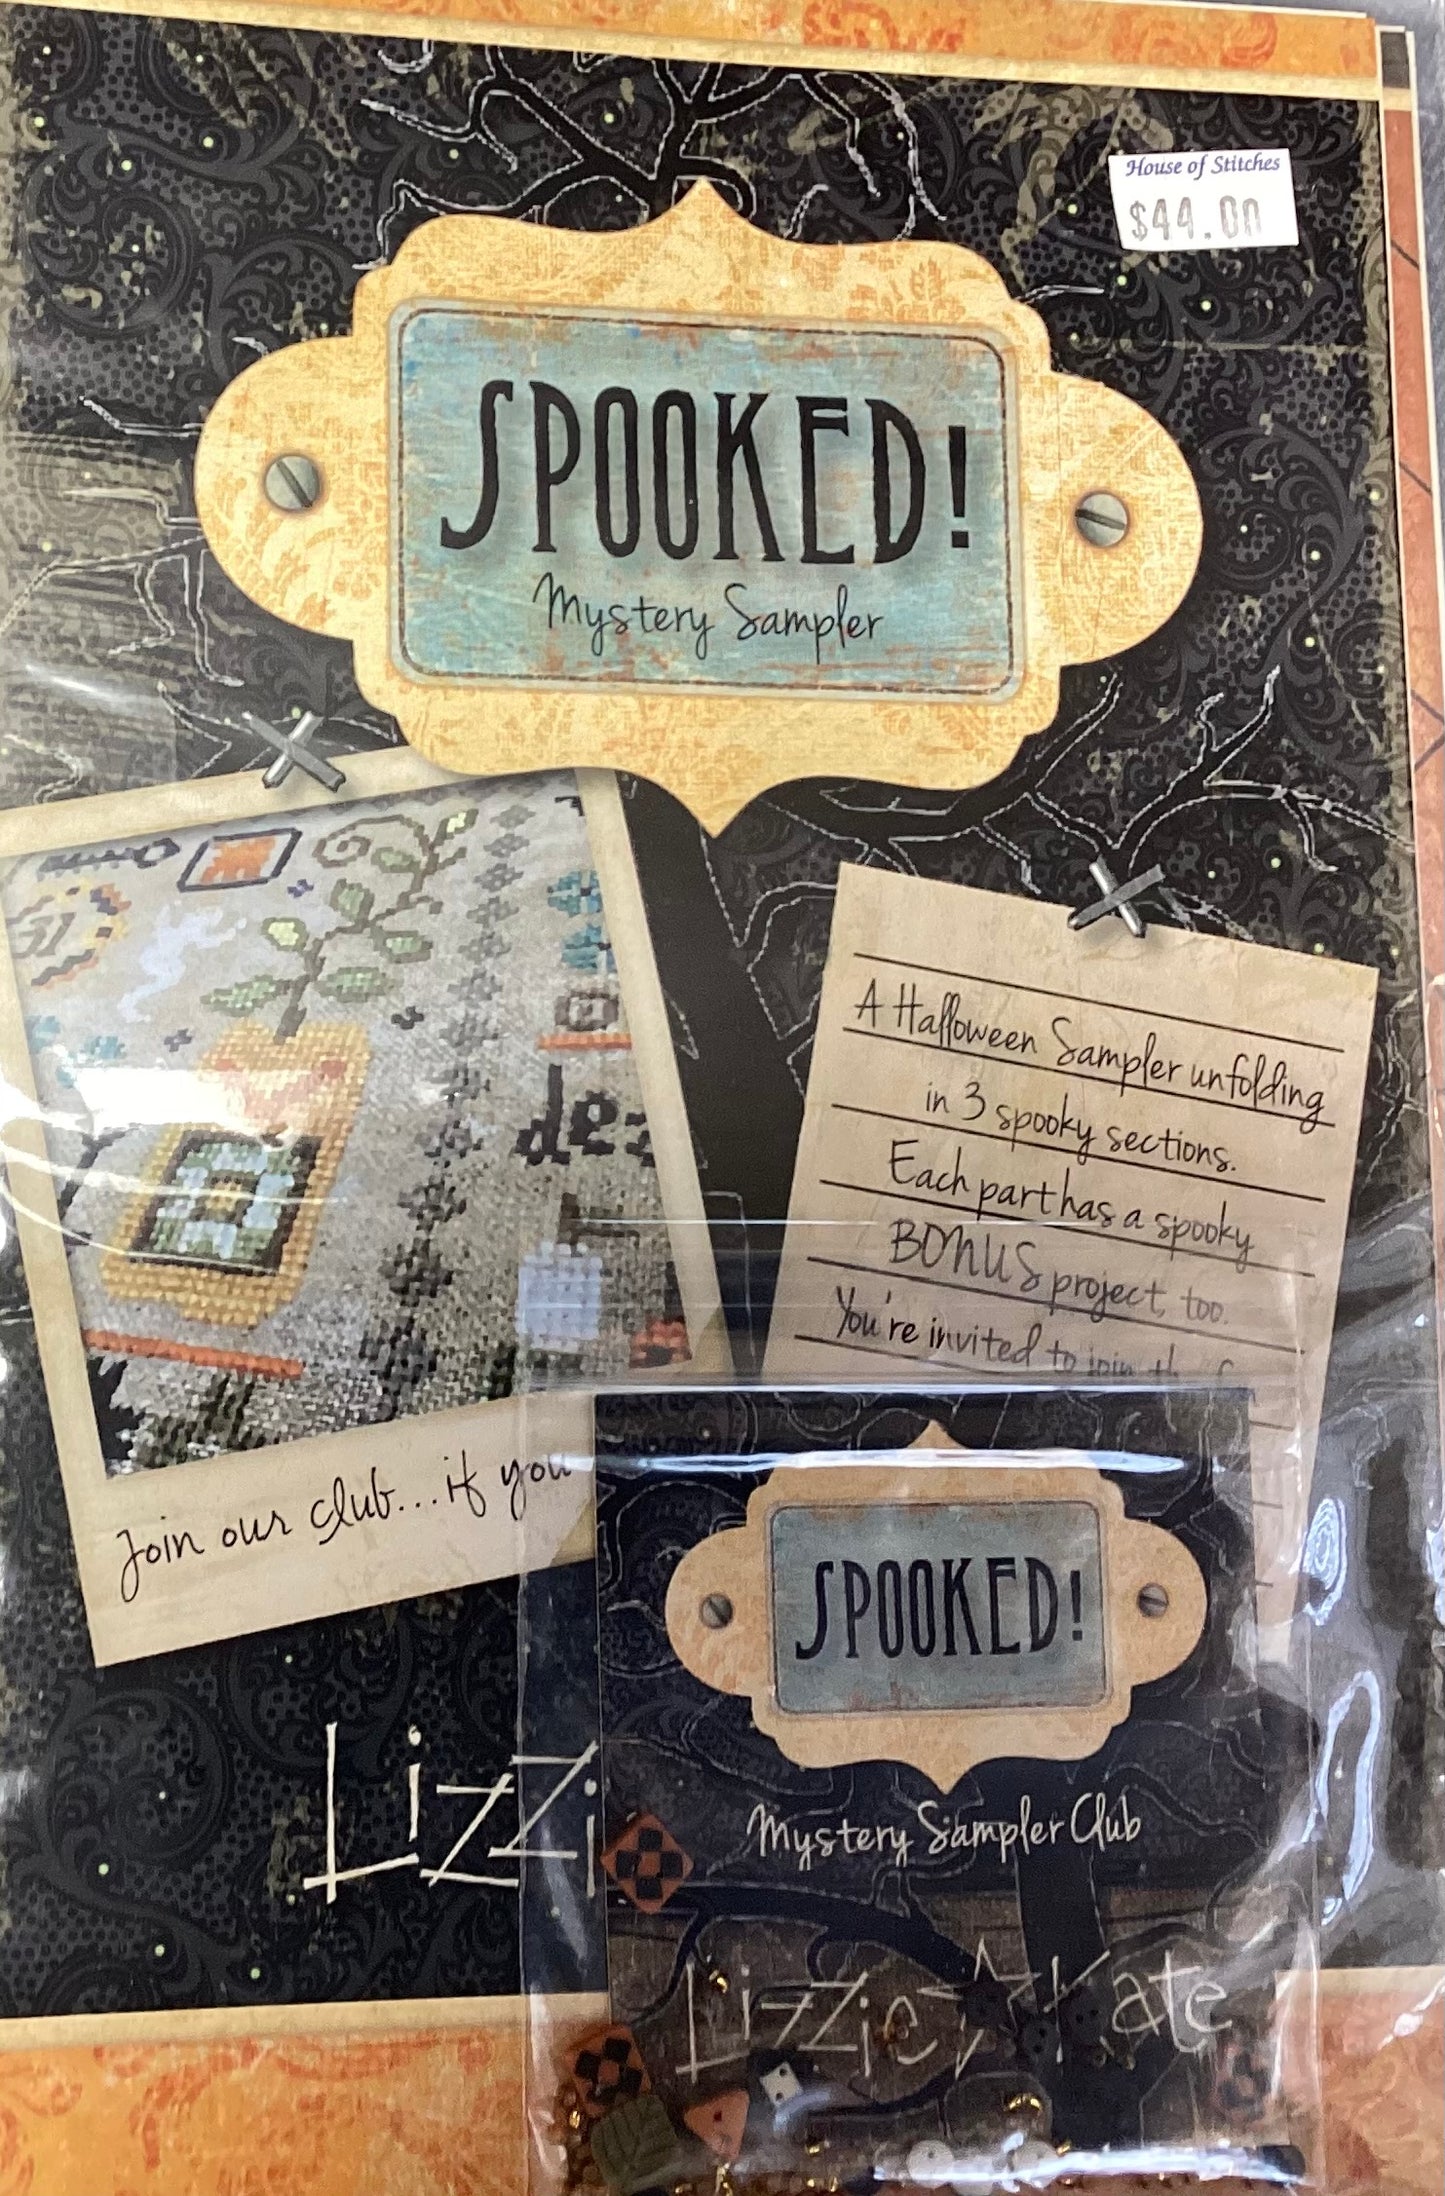 Spooked! Mystery Sampler Bundle by Lizzie Kate